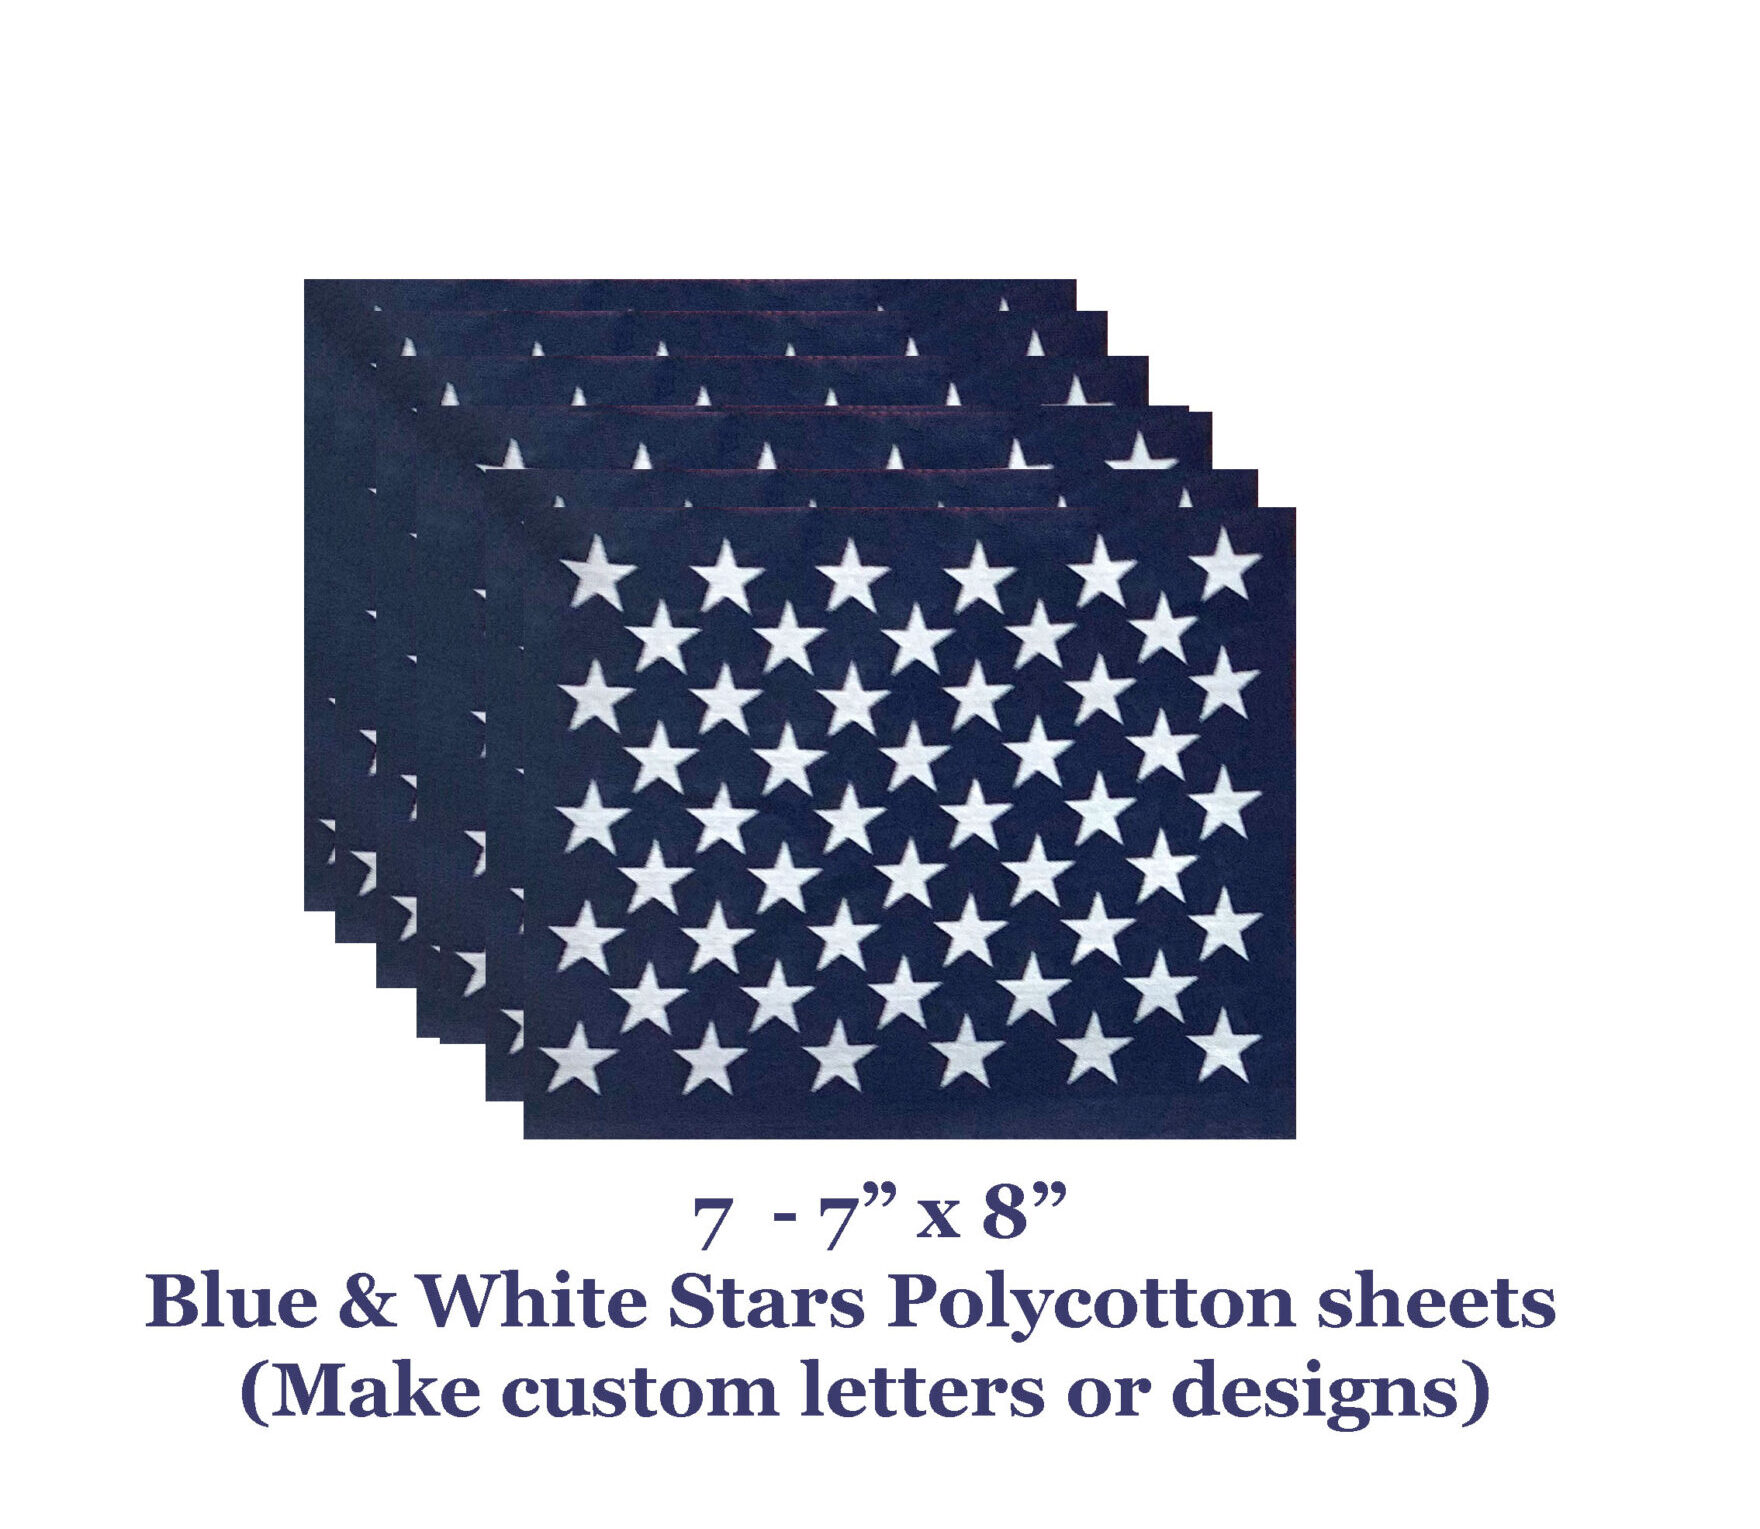 27PC Patriotic DIY Banner Kit With Letter Templates – Flag Store